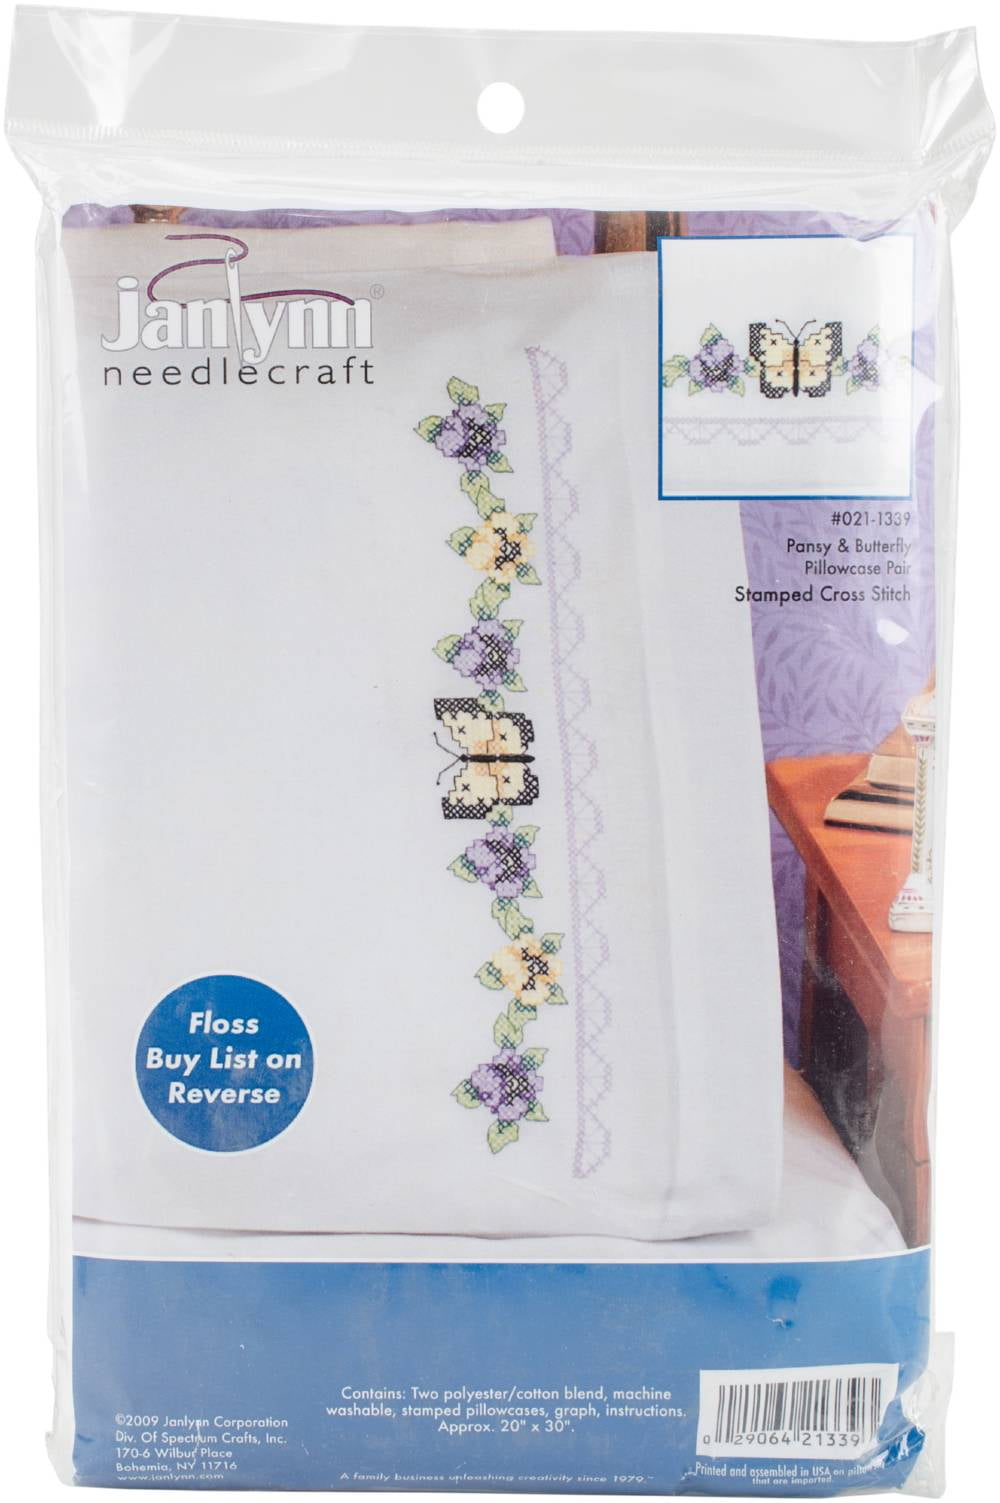 Janlynn Dragonfly Pillowcase Pair Stamped Cross Stitch 20 by 30-Inch